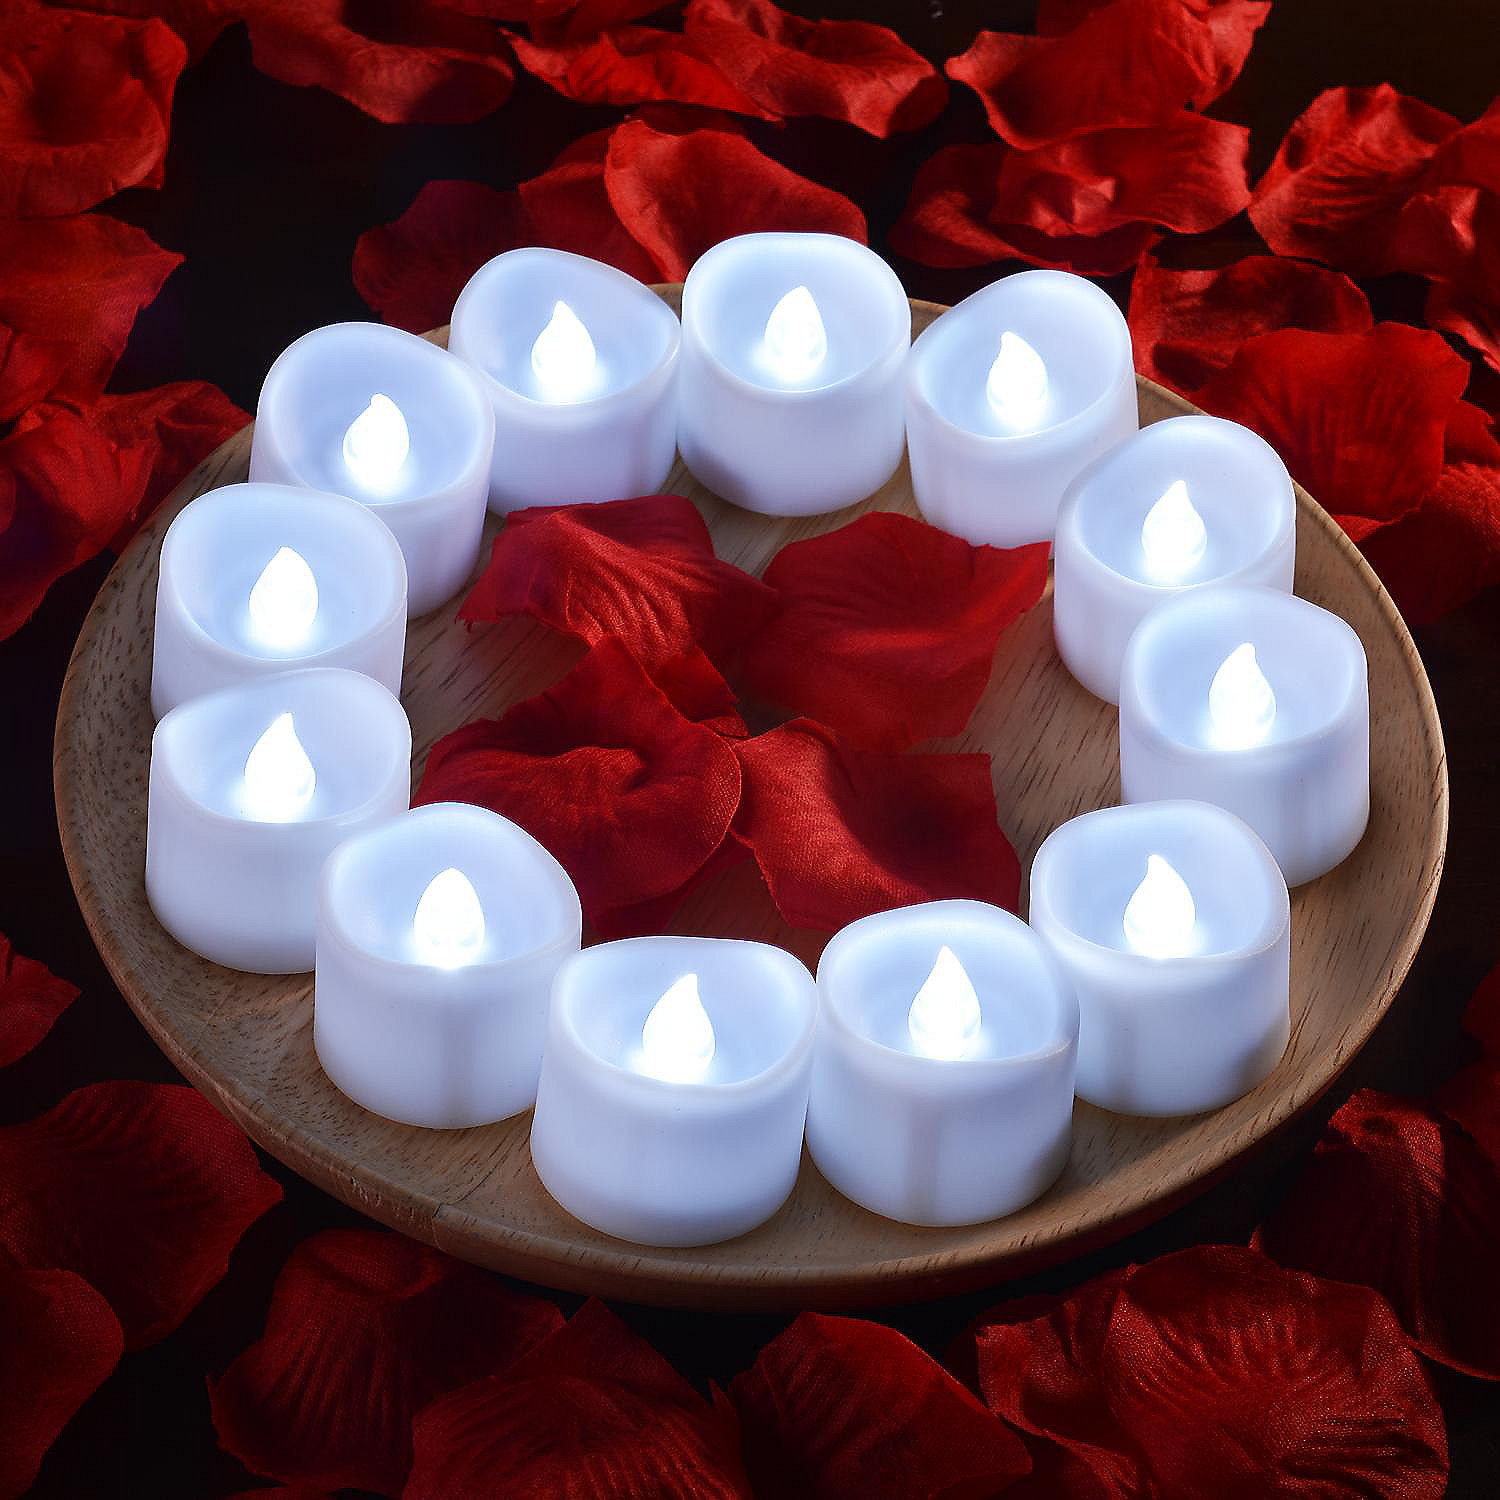 12pcs Flameless Flickering LED Candles Tea Light Battery Operated Cool White 